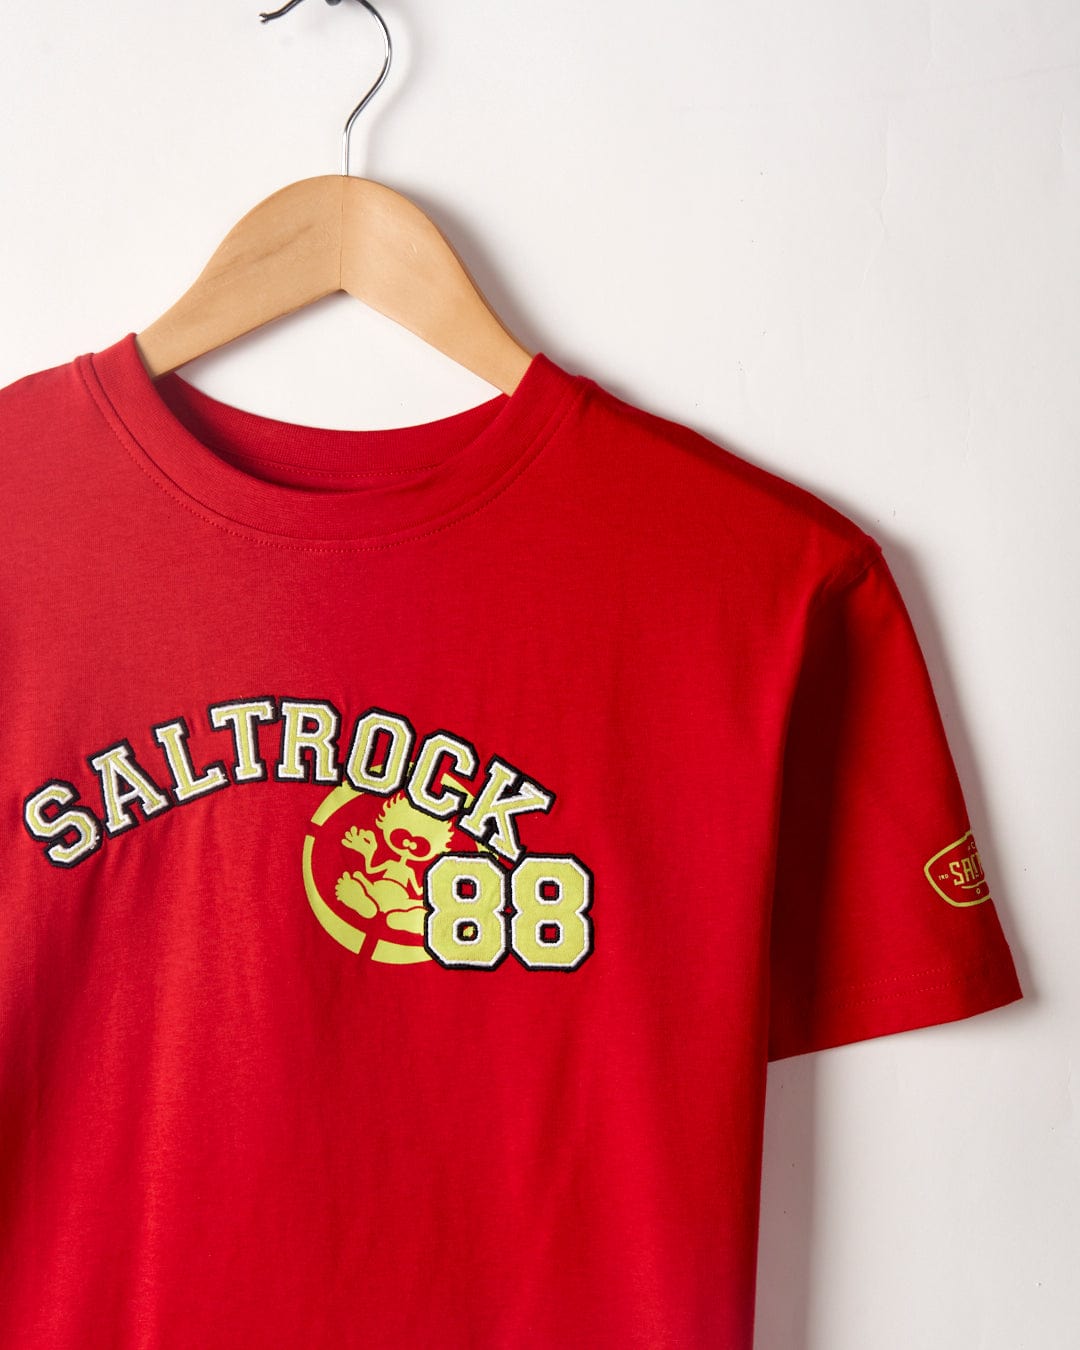 A red Drop Out - Kids T-Shirt - Red, boasting Saltrock branding with a surfer and the number 88 on the front, hangs on a wooden hanger against a white wall. Crafted from 100% cotton, it perfectly combines comfort and style.